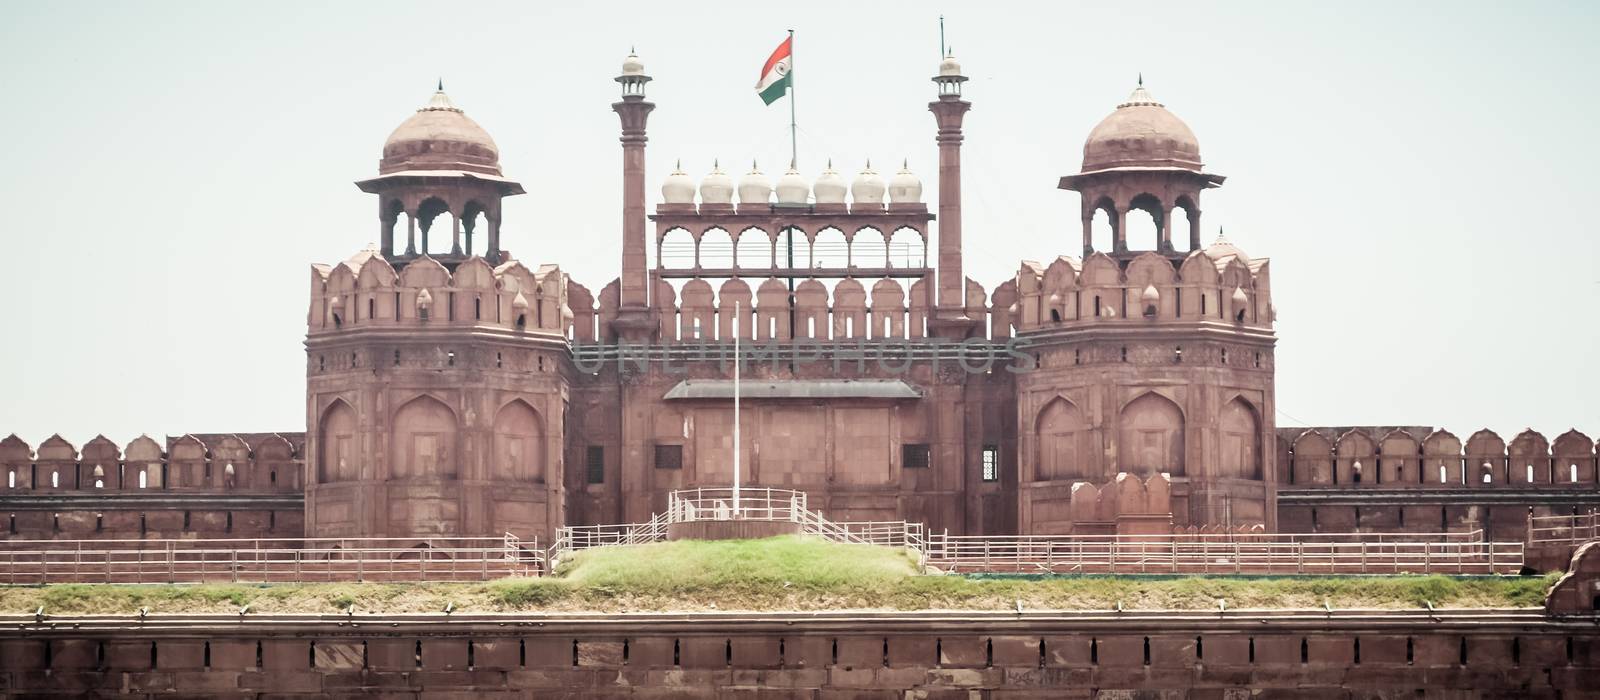 Red Fort Delhi India 1 May 2019 - Famous Red Fort also known as Blessed Fort, Agra Fort or Lāl Qila, made of massive red sandstone walls build by Mughal emperor Shah Jahan is historic palaces in world by sudiptabhowmick